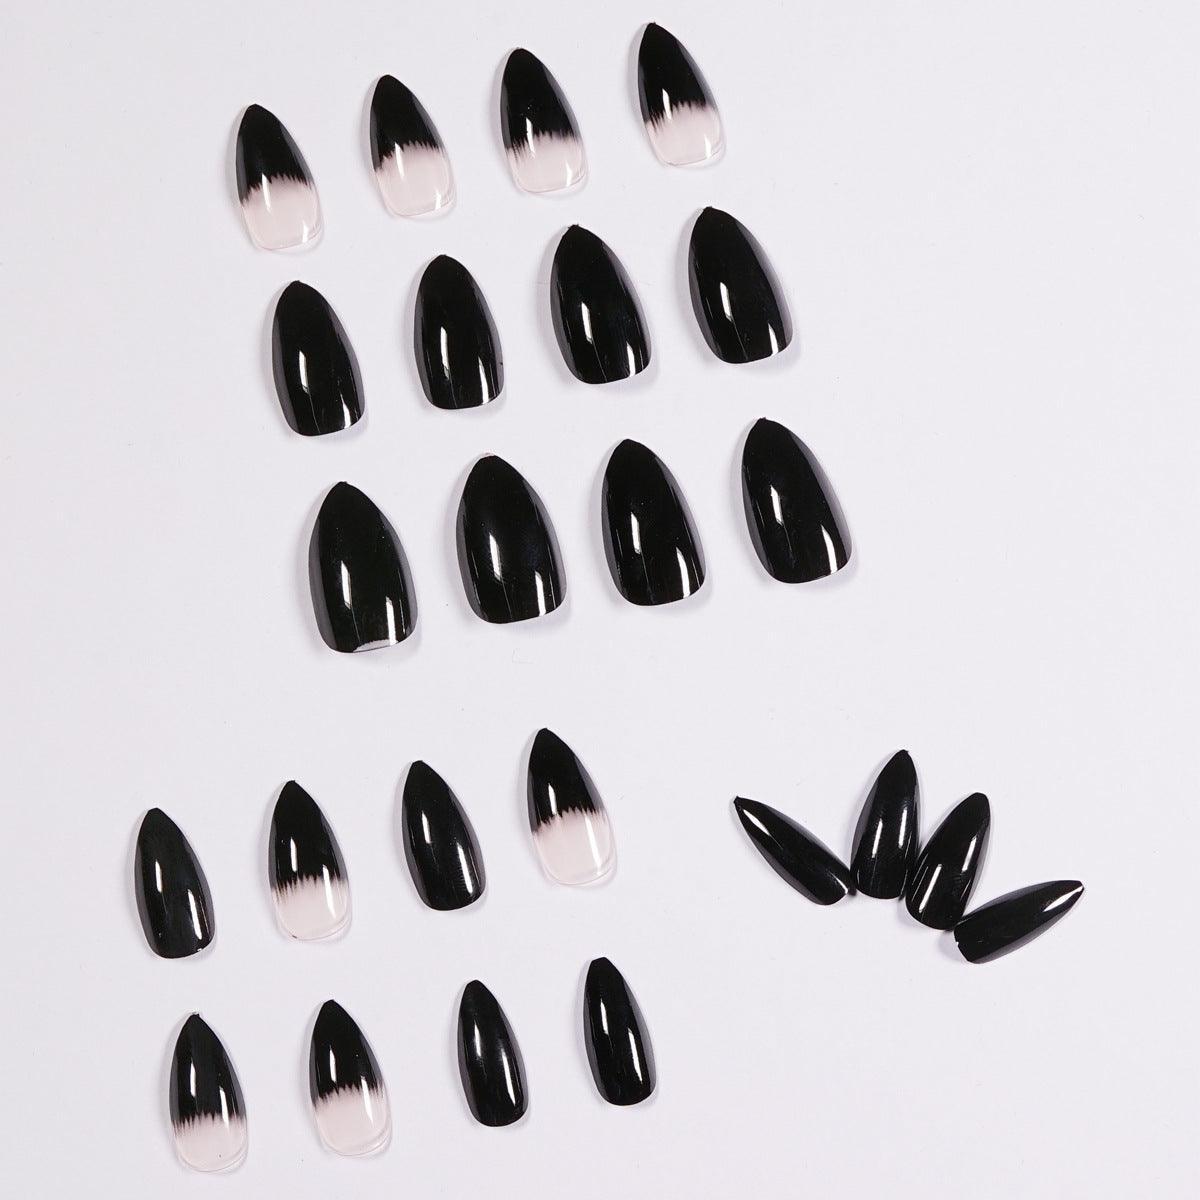 Pure Black and Black Ombre Medium Length Press-On Nails - Belle Rose Nails